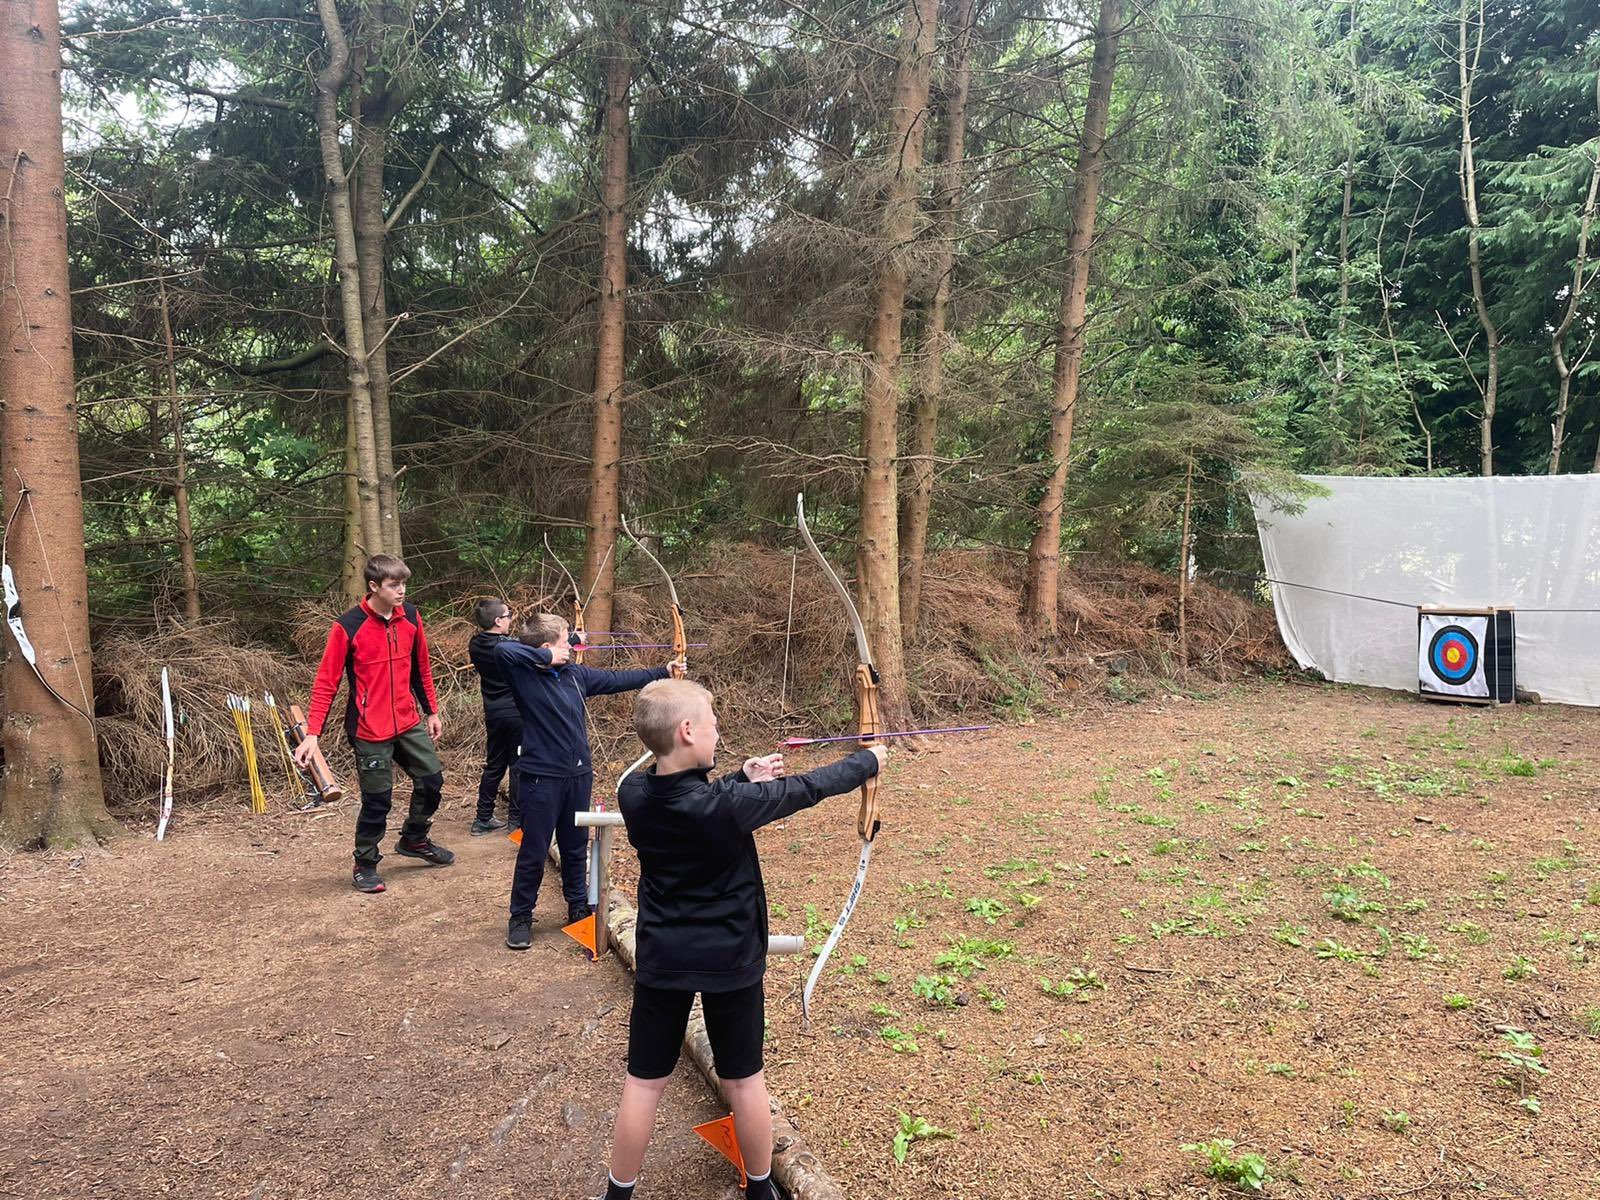 Three students get ready to have a go at archery under the watchful eye of the instructor.